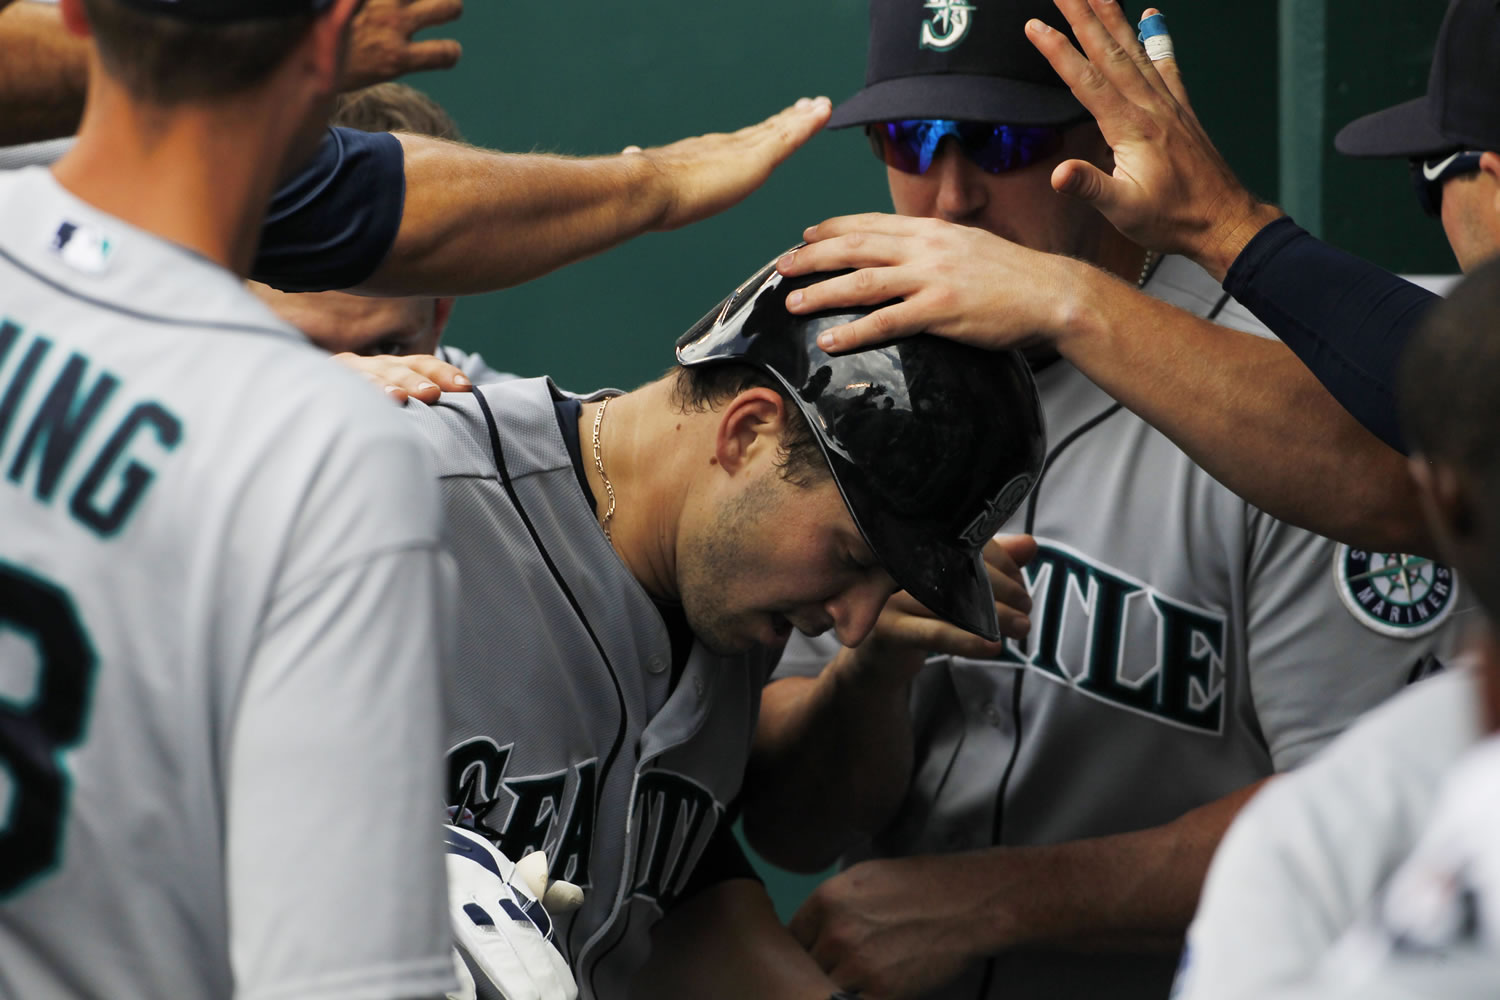 Seattle Mariners' Mike Zunino, center, is congratulated by his teammates in the dugout after hitting a home run against the Kansas City Royals in the seventh inning of a baseball game at Kauffman Stadium in Kansas City, Mo., Sunday, June 22, 2014. (AP Photo/Colin E.